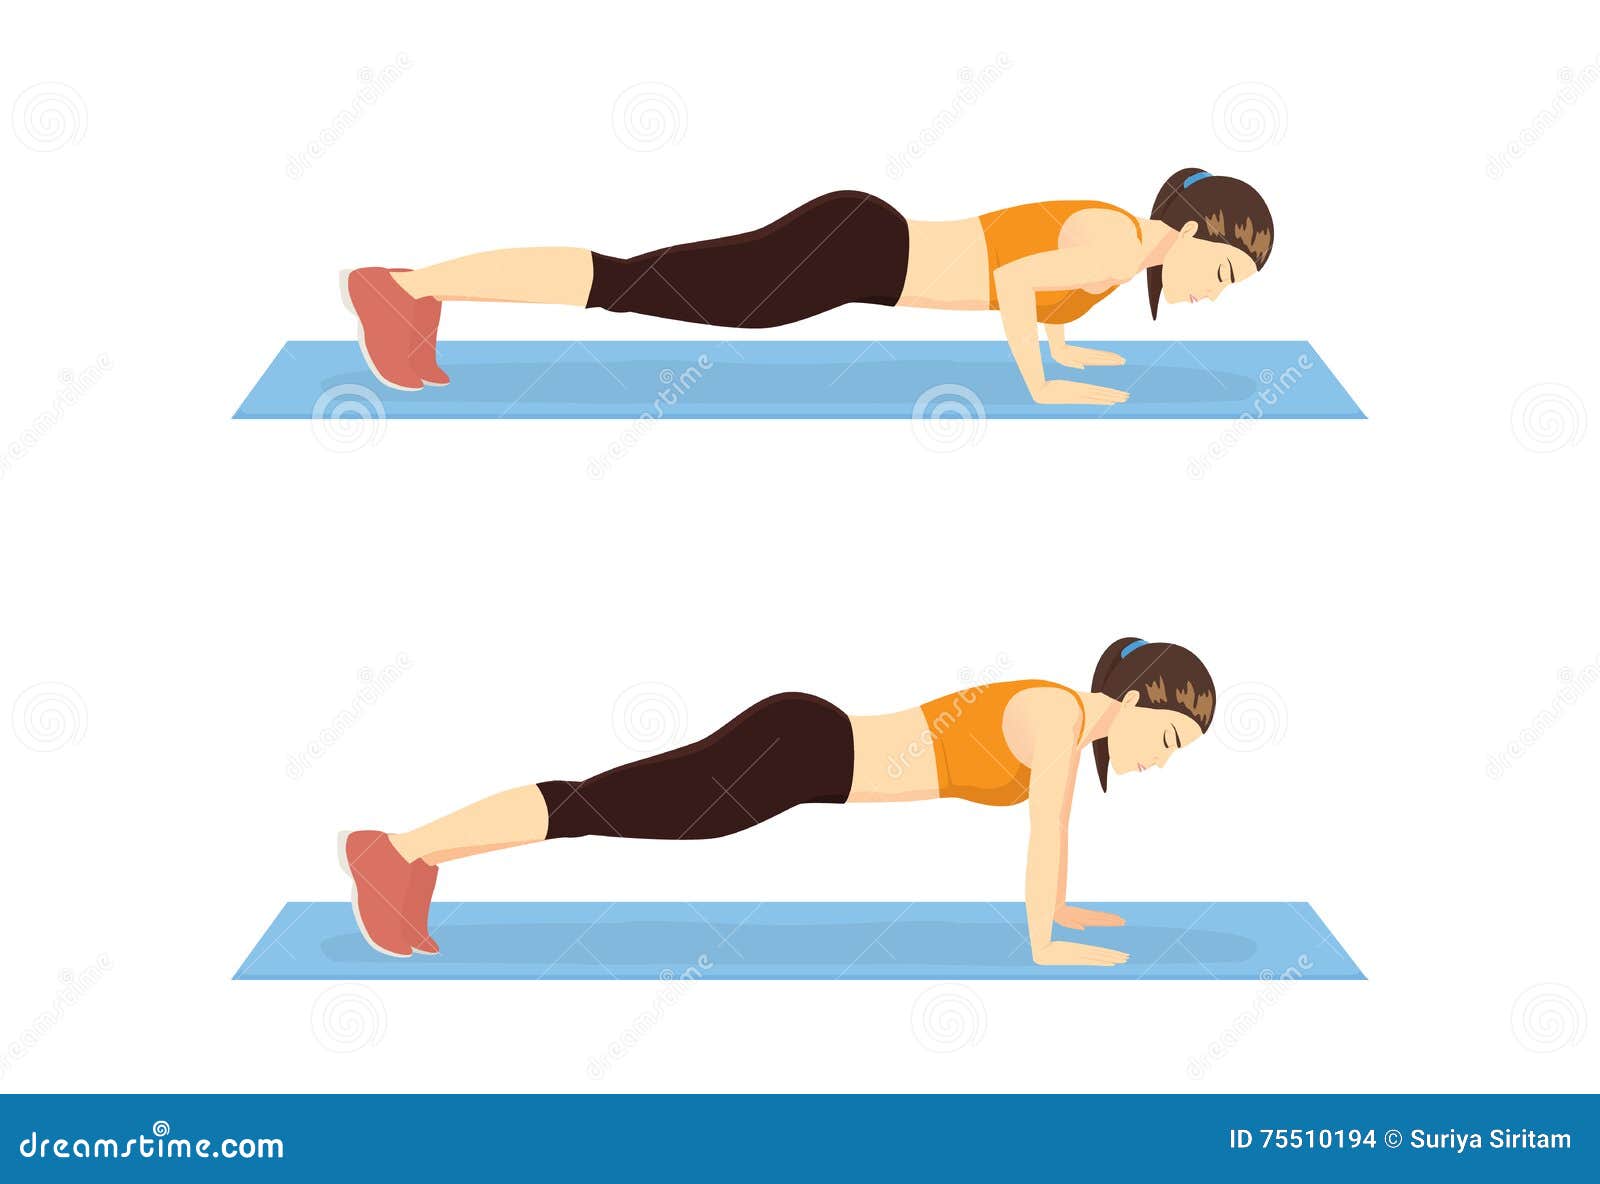 step to instruction in push up